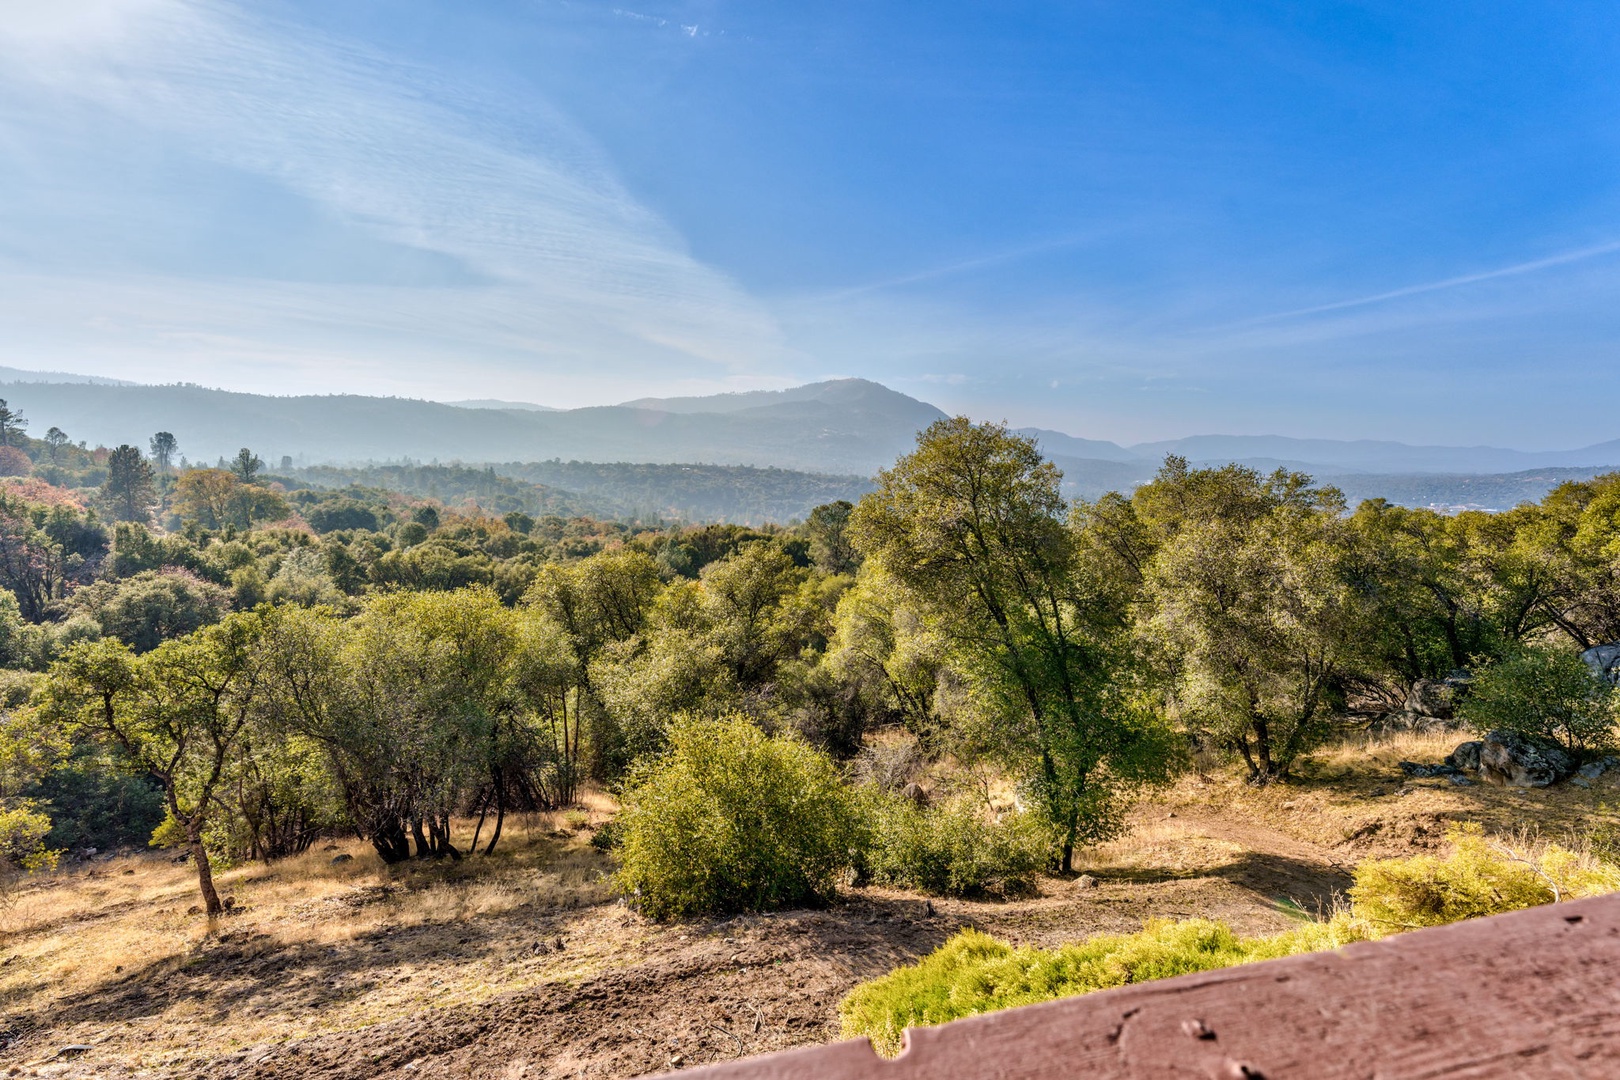 Stunning views of the Sierra Foothills will serve as an incredible backdrop to your family getaway